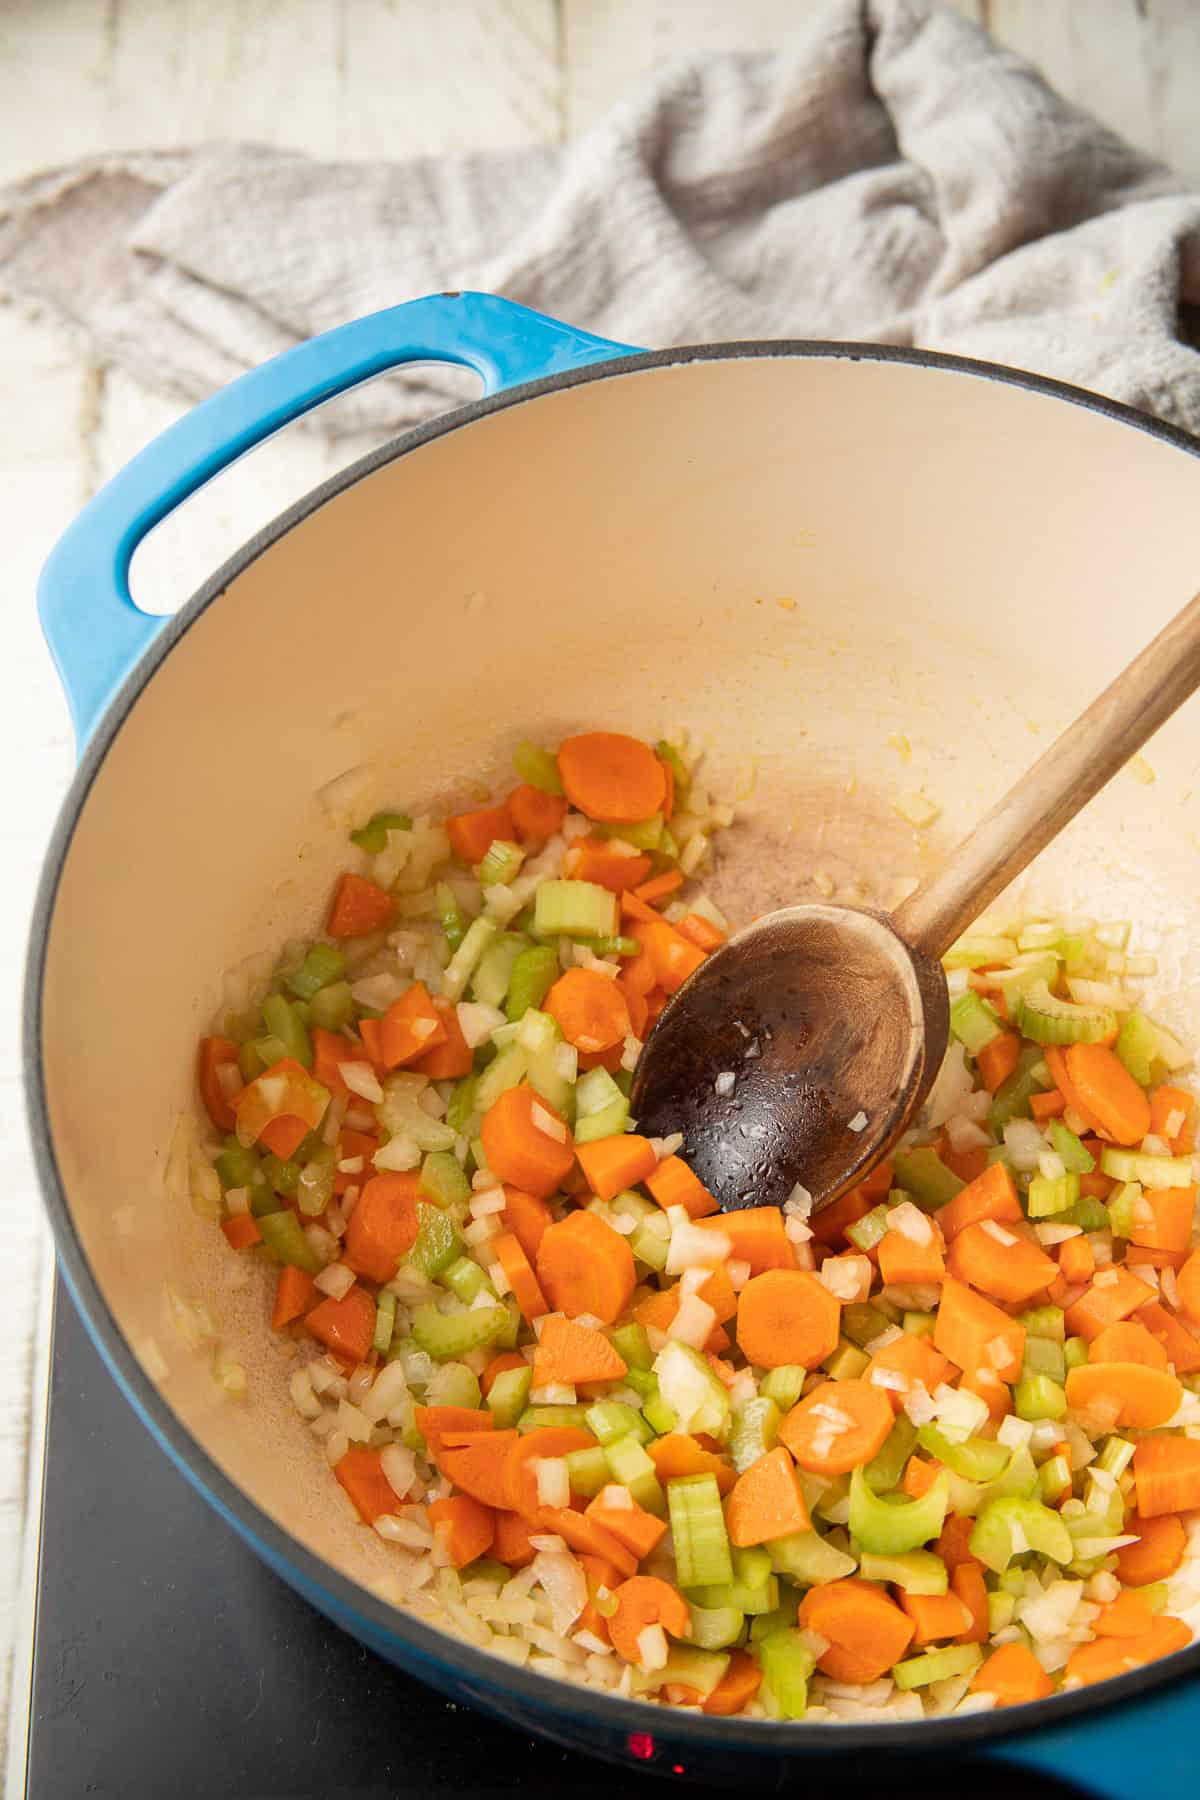 Onions, carrots and celery cooking in a pot with wooden spoon.